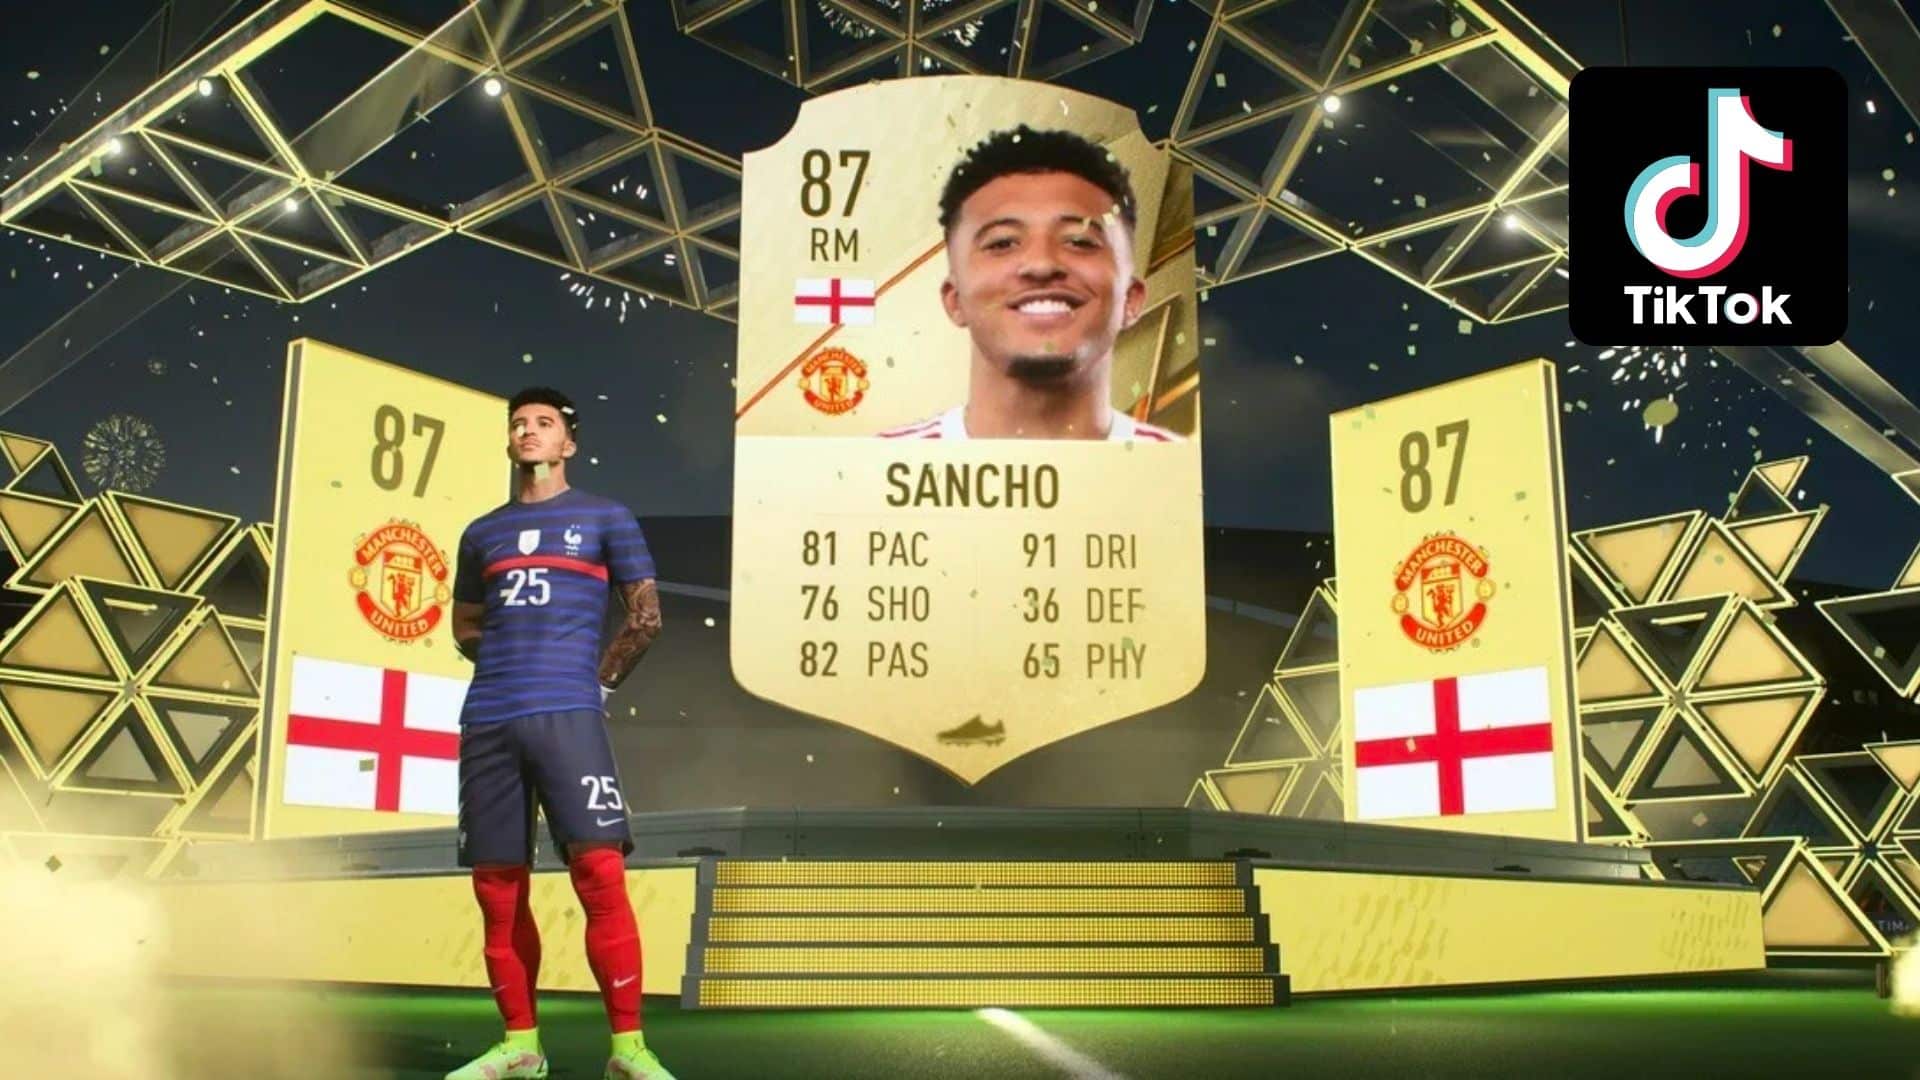 fifa 22 walkout with sancho